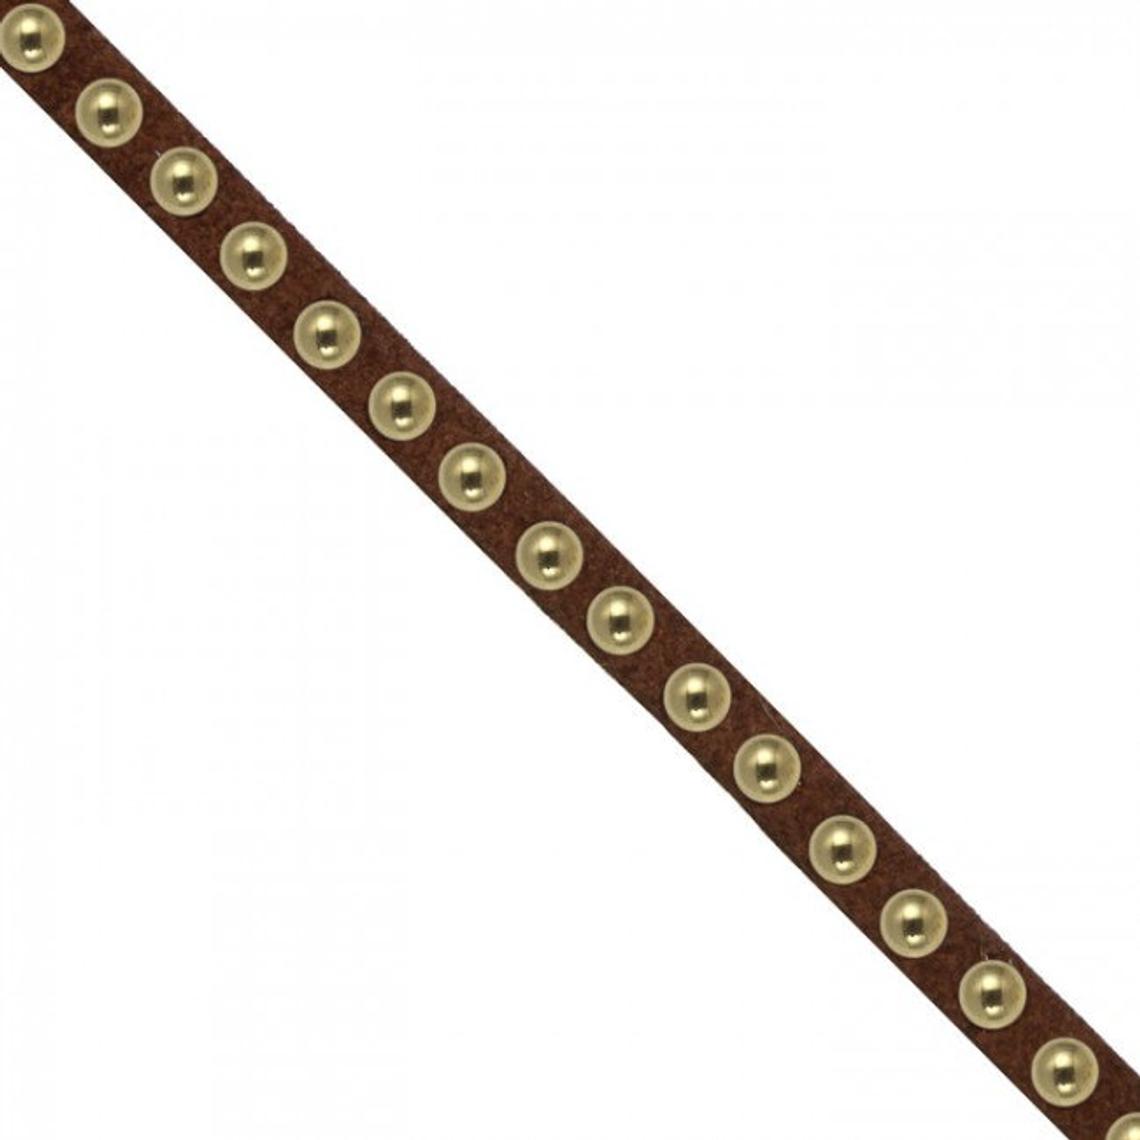 6mm Studded Suede Trim Brown/Gold